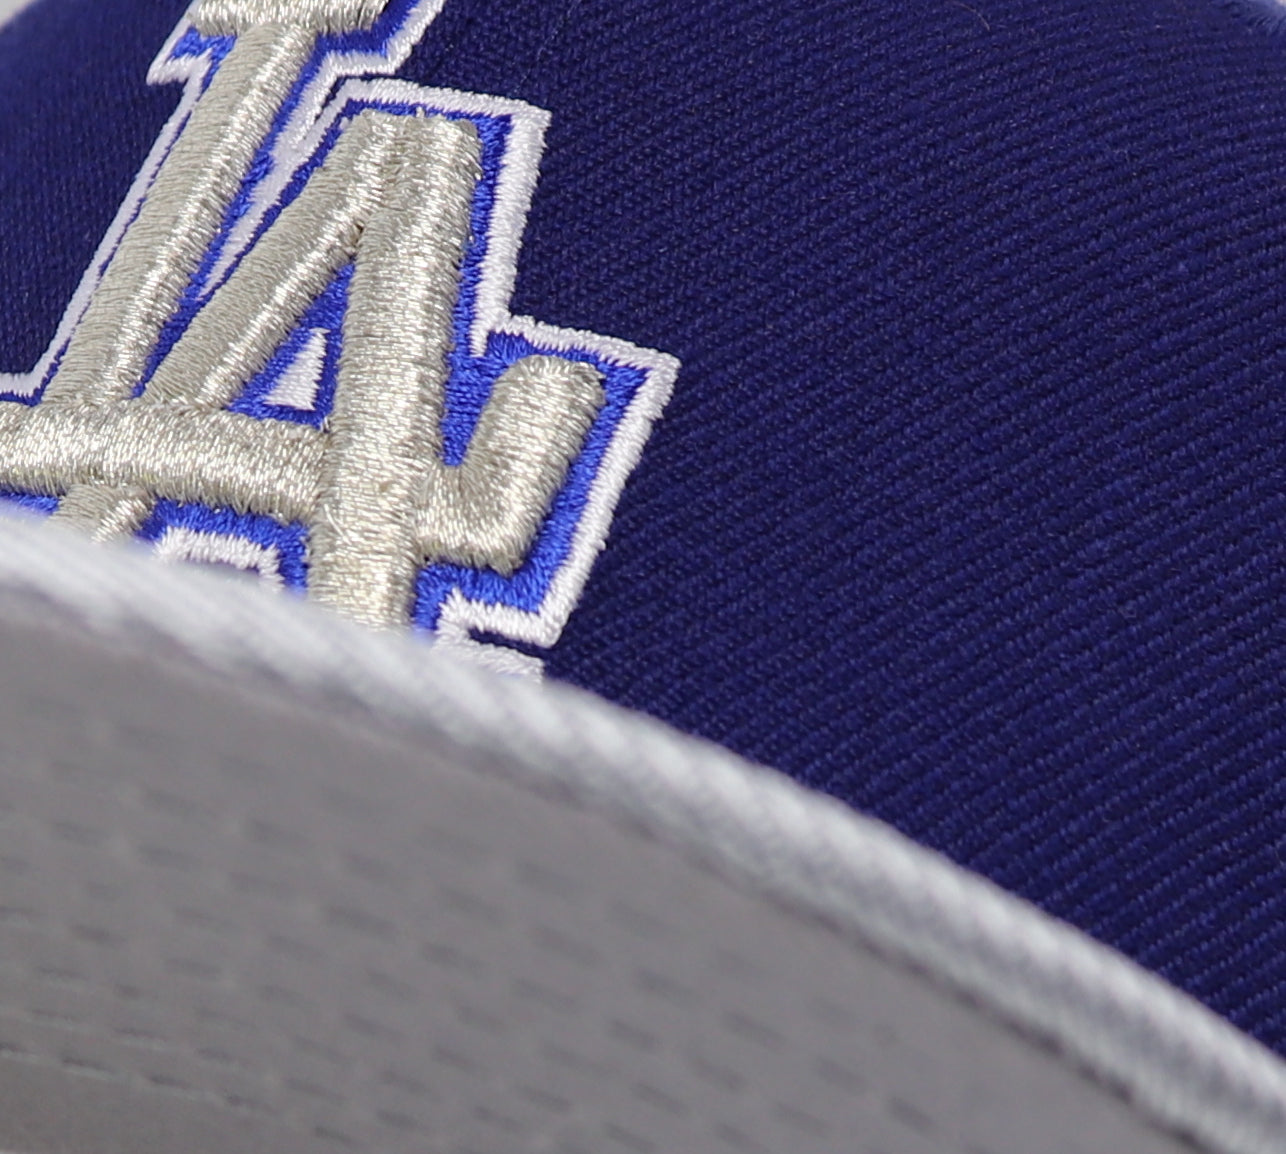 LOS ANGELES DODGERS (ROYAL/SILVER) NEW ERA 59FIFTY FITTED